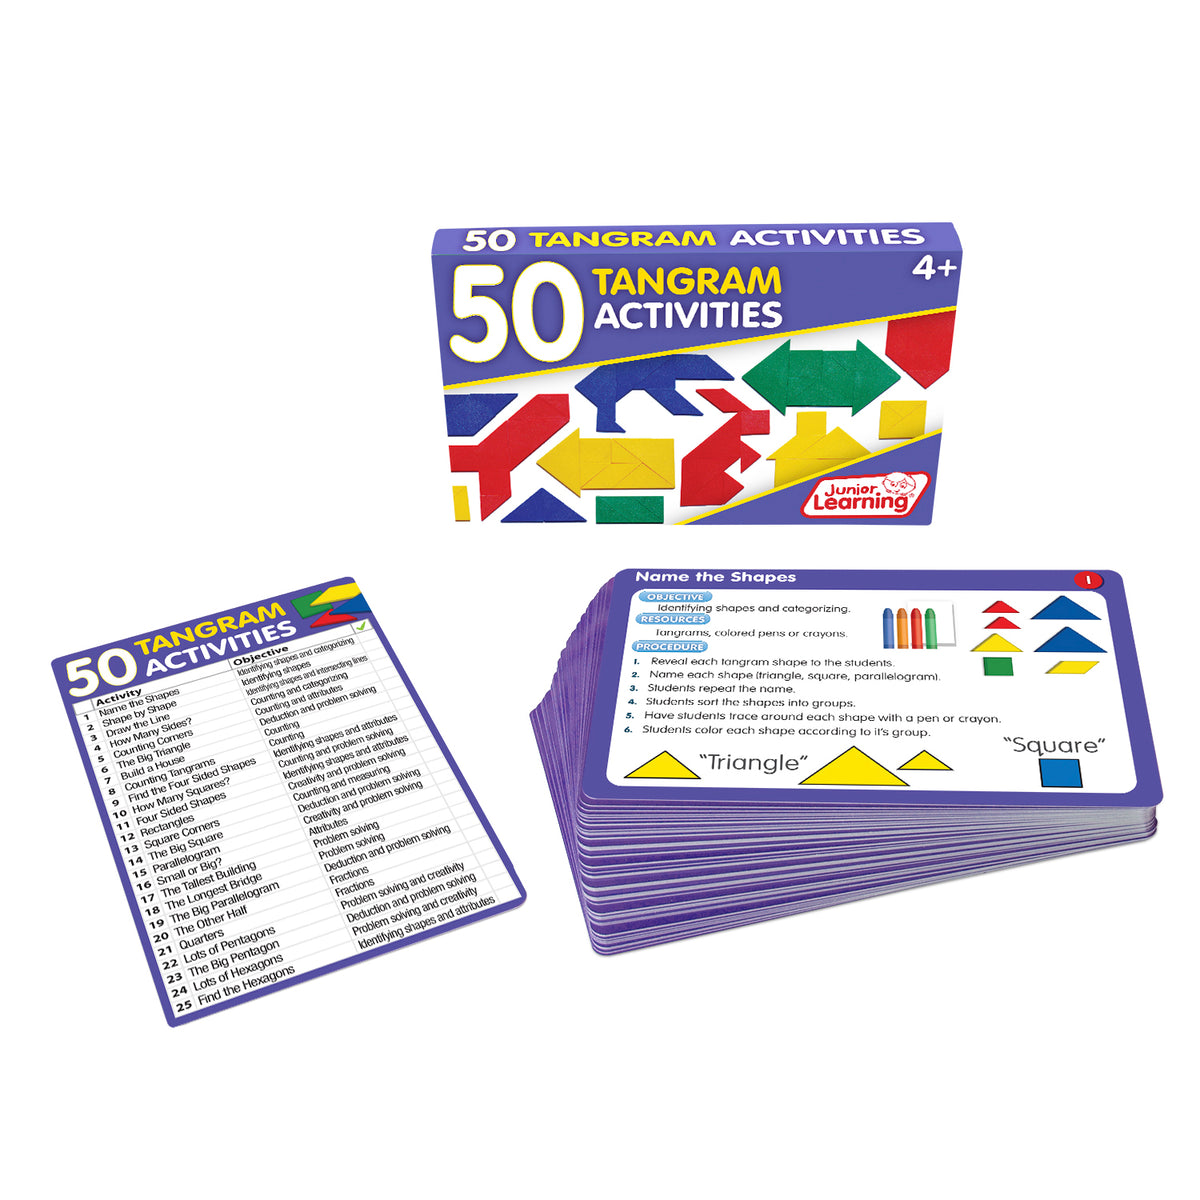 Junior Learning JL659 50 Tangram Activities box and cards